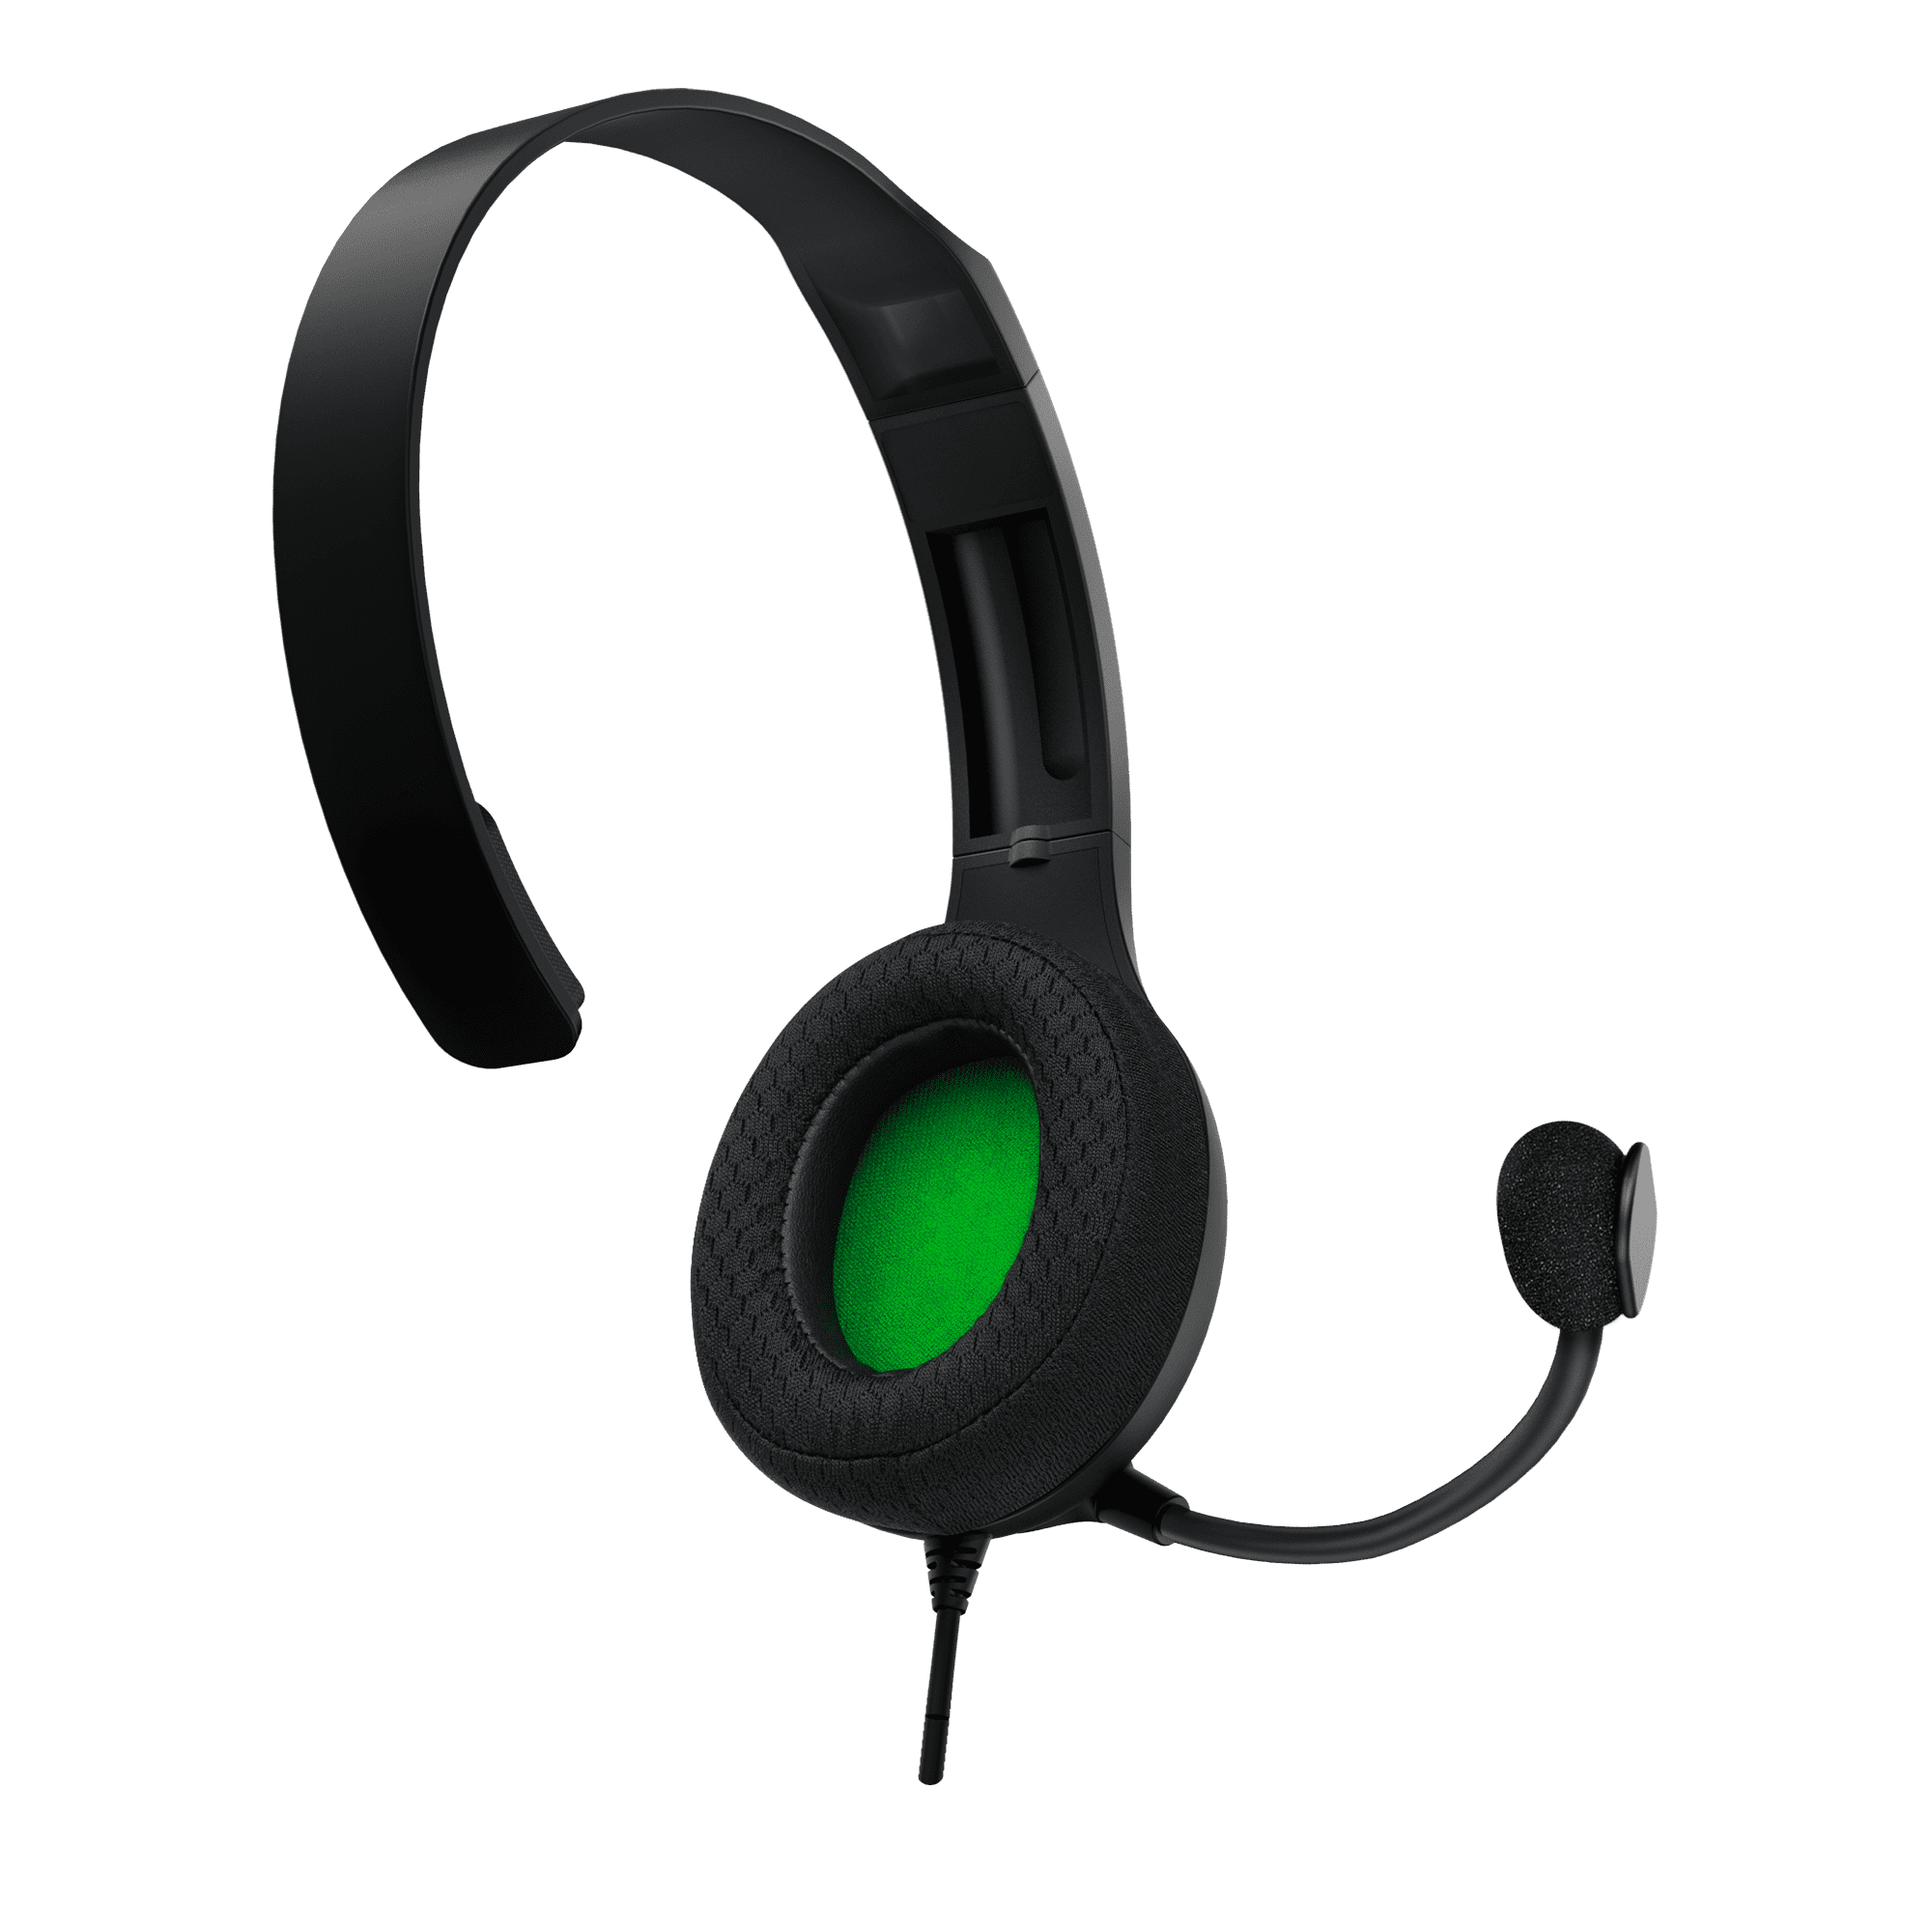 UNBOXING and First Look - PDP LvL30 Chat Headset for Xbox One